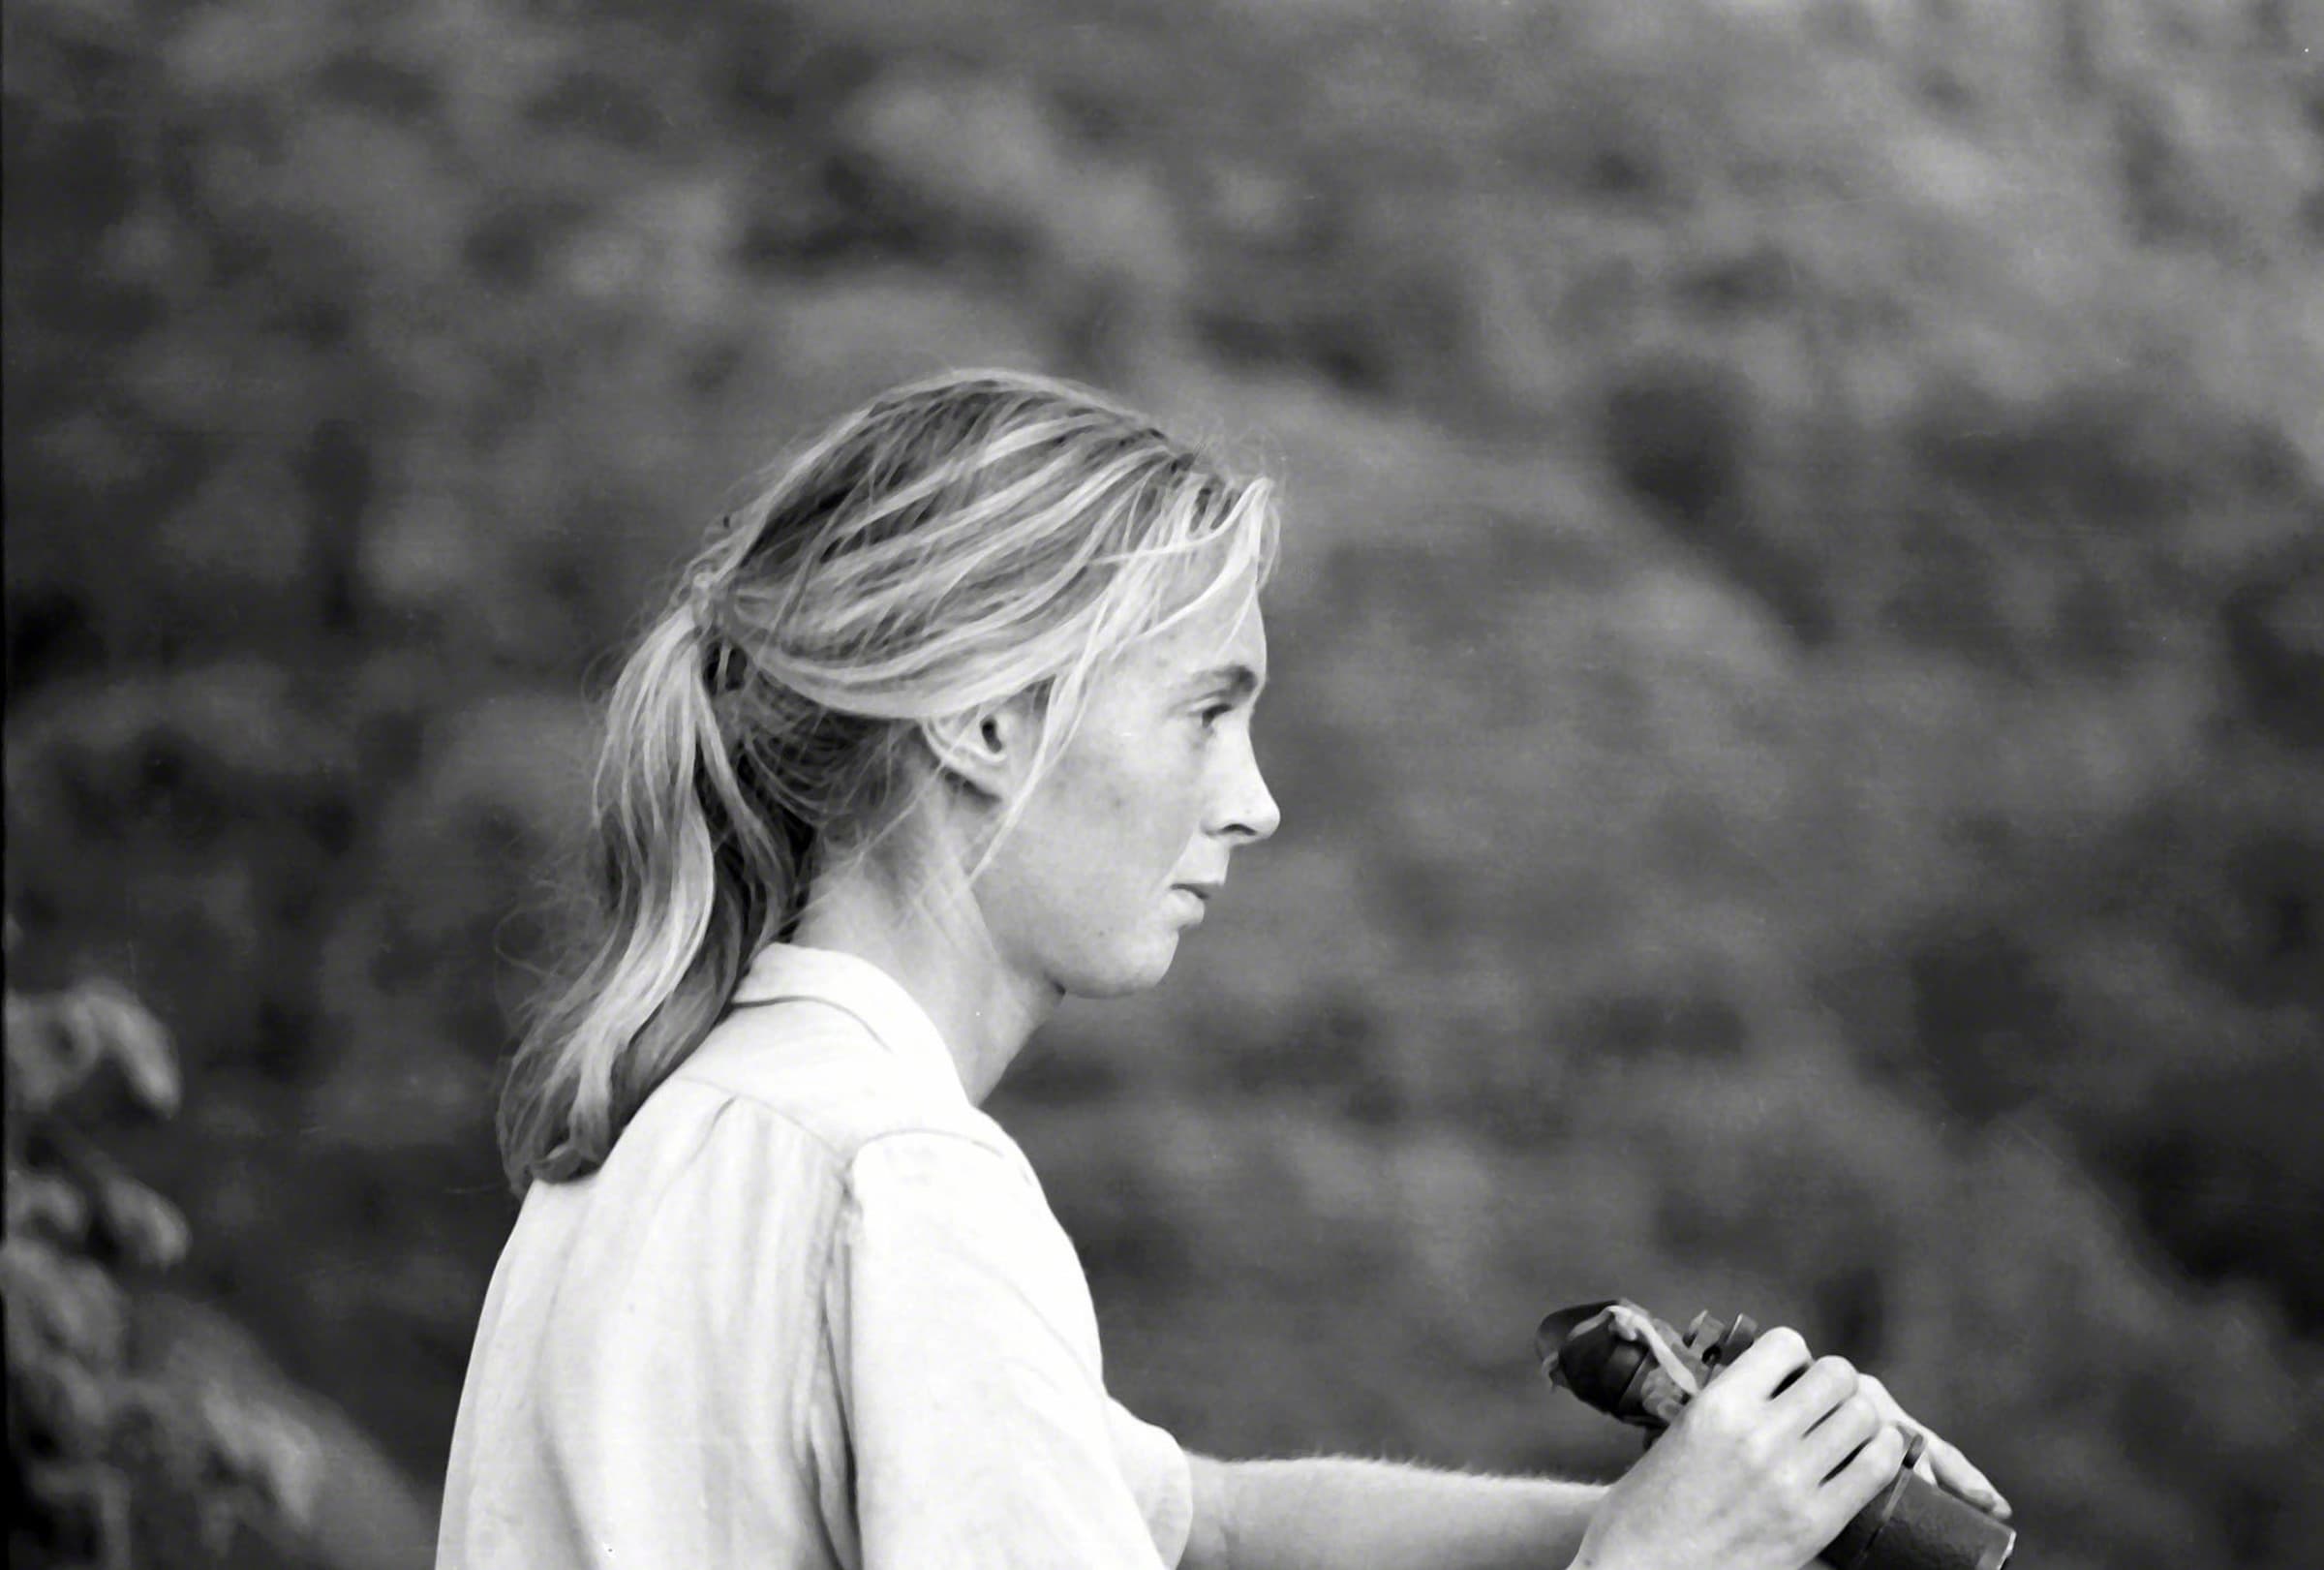 Young researcher Jane Goodall in Gombe Stream Reserve. (© The Jane Goodall Institute/Judy Goodall)